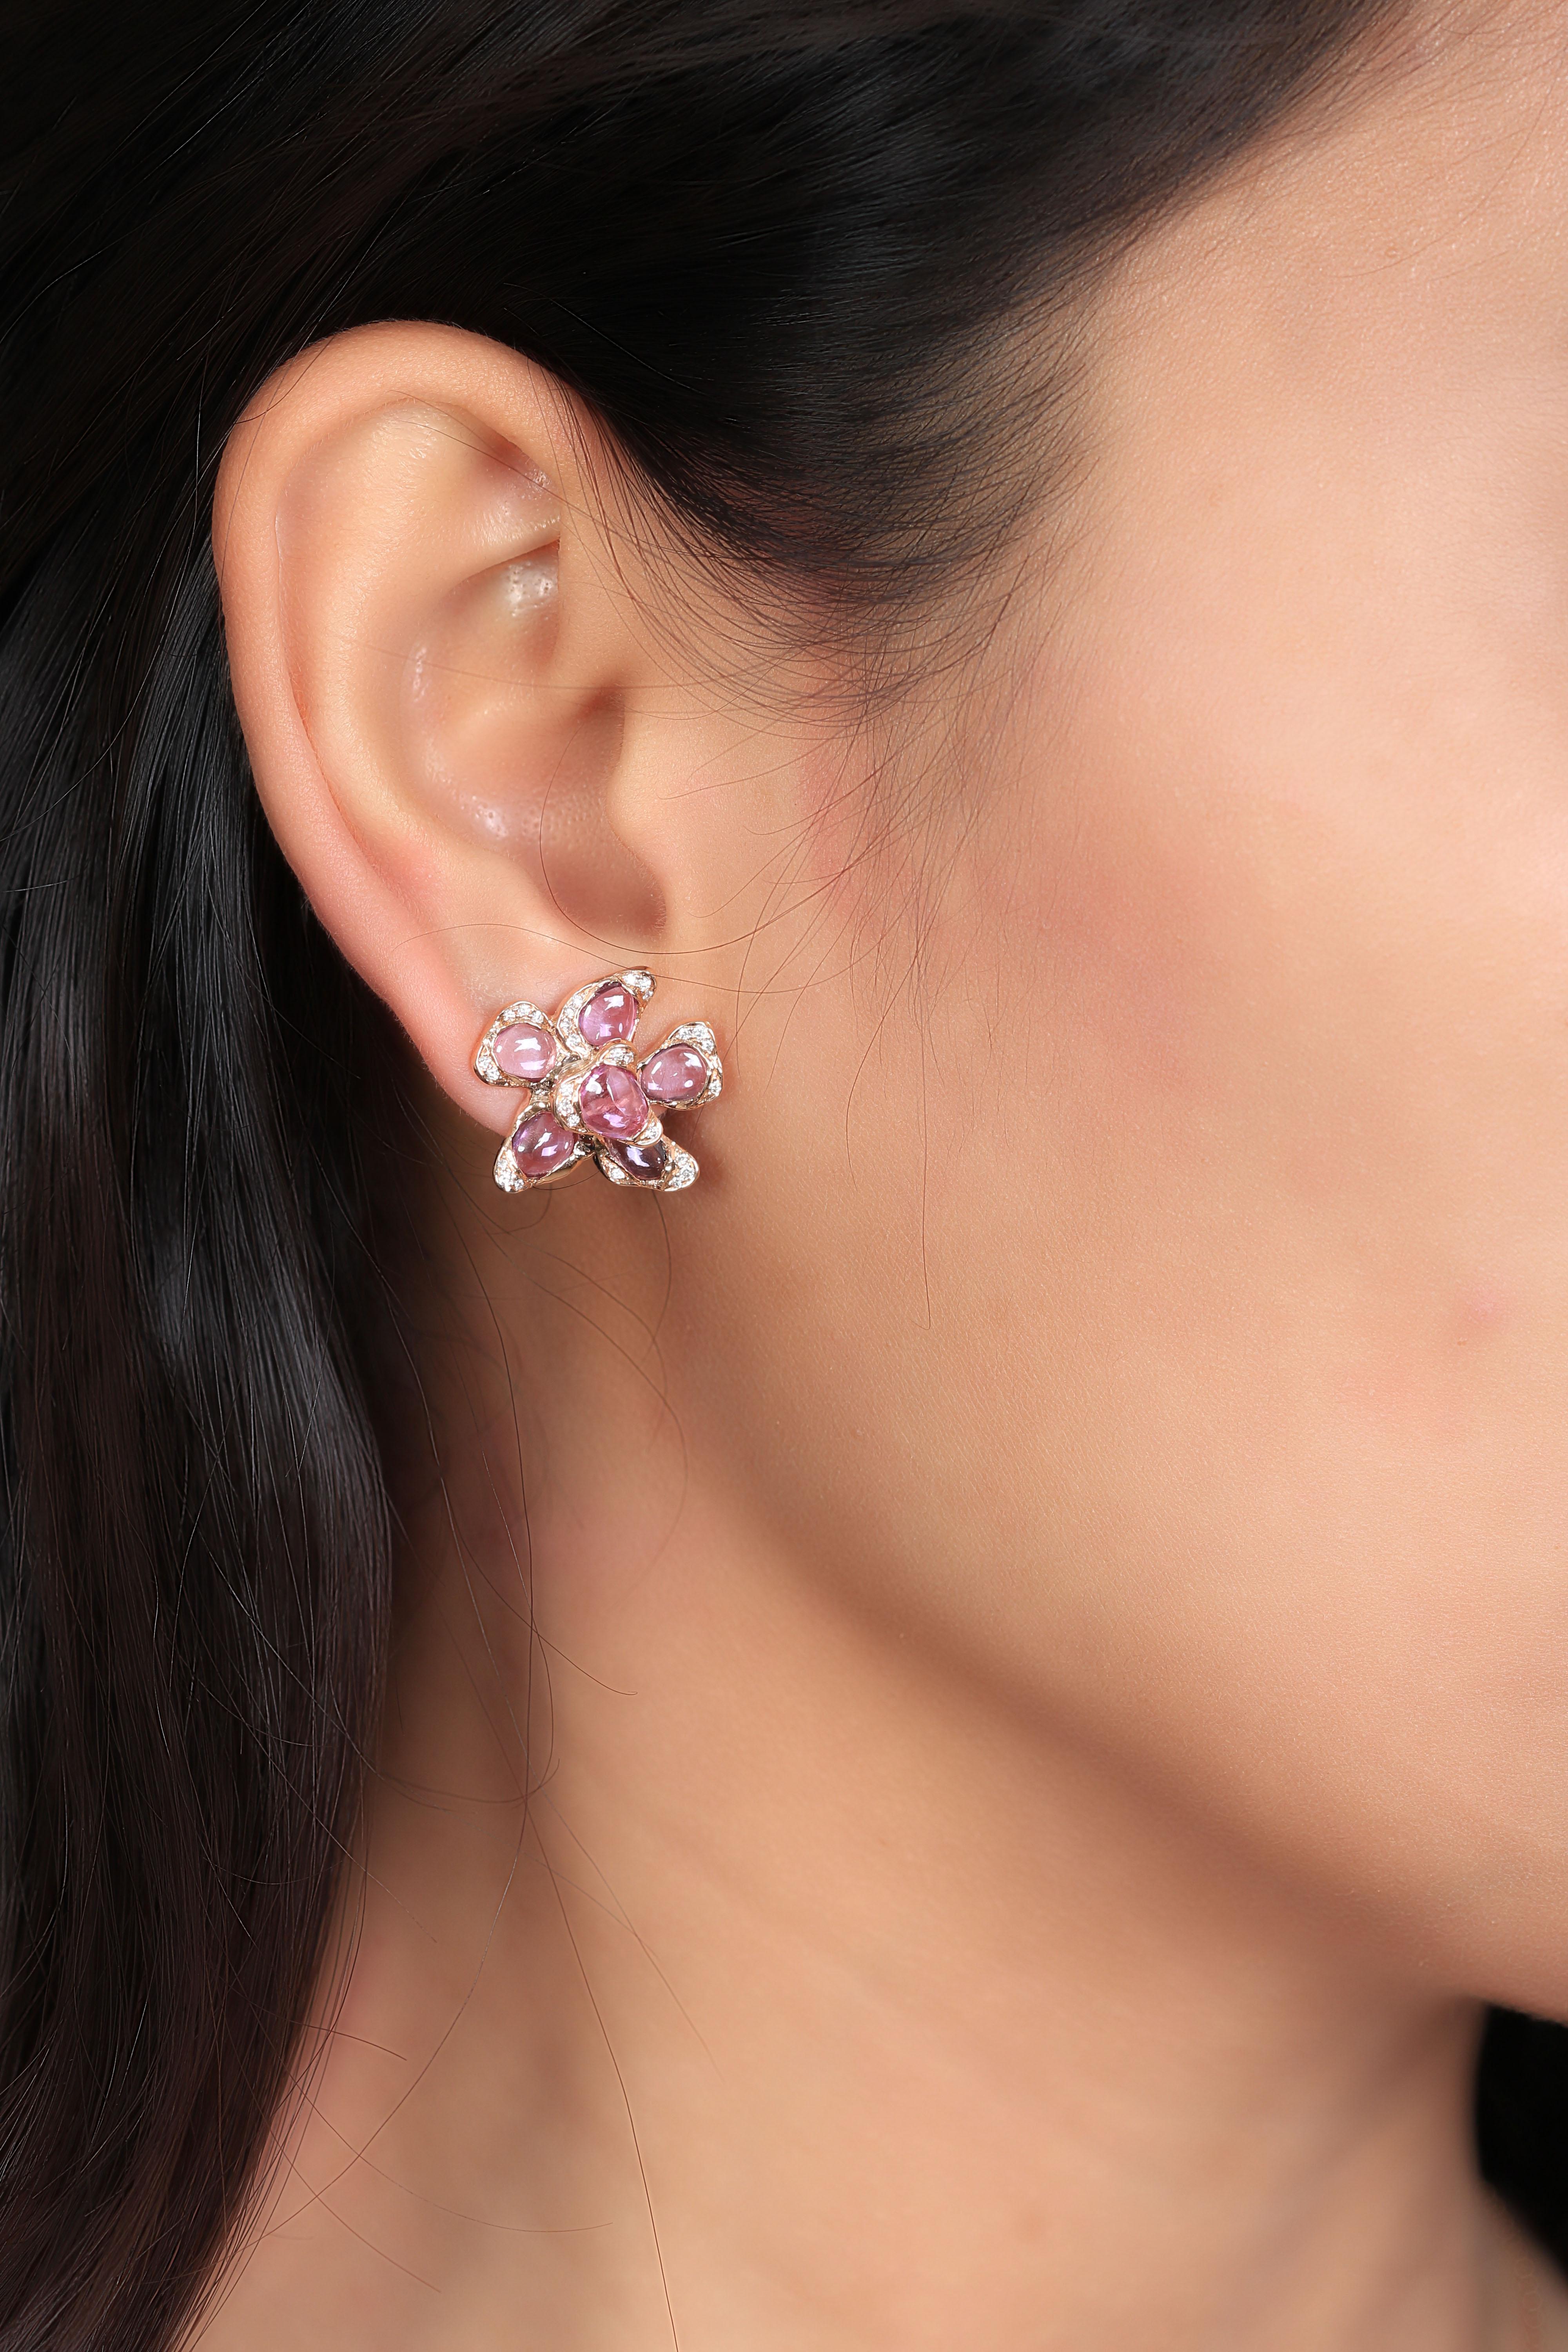 A real two classic, reinvented like pieces with rose gold and pink sapphires, truly illuminating. You will be anything but pink when you wear these magical and imaginative sapphire earrings. The light pink shades are creatively designed to shine.